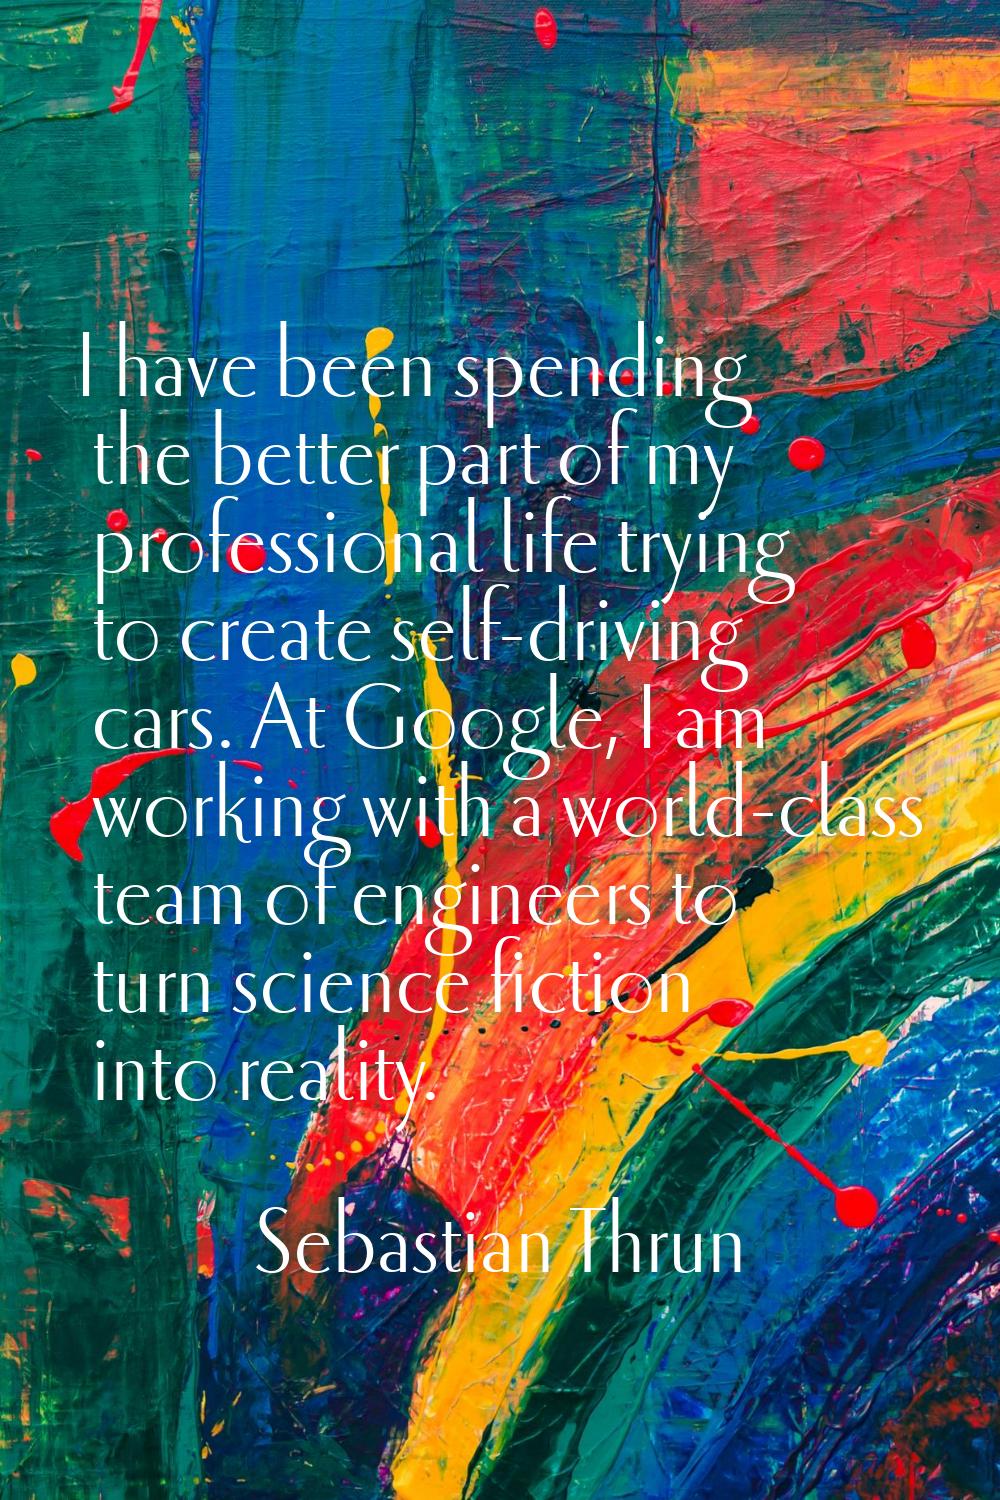 I have been spending the better part of my professional life trying to create self-driving cars. At